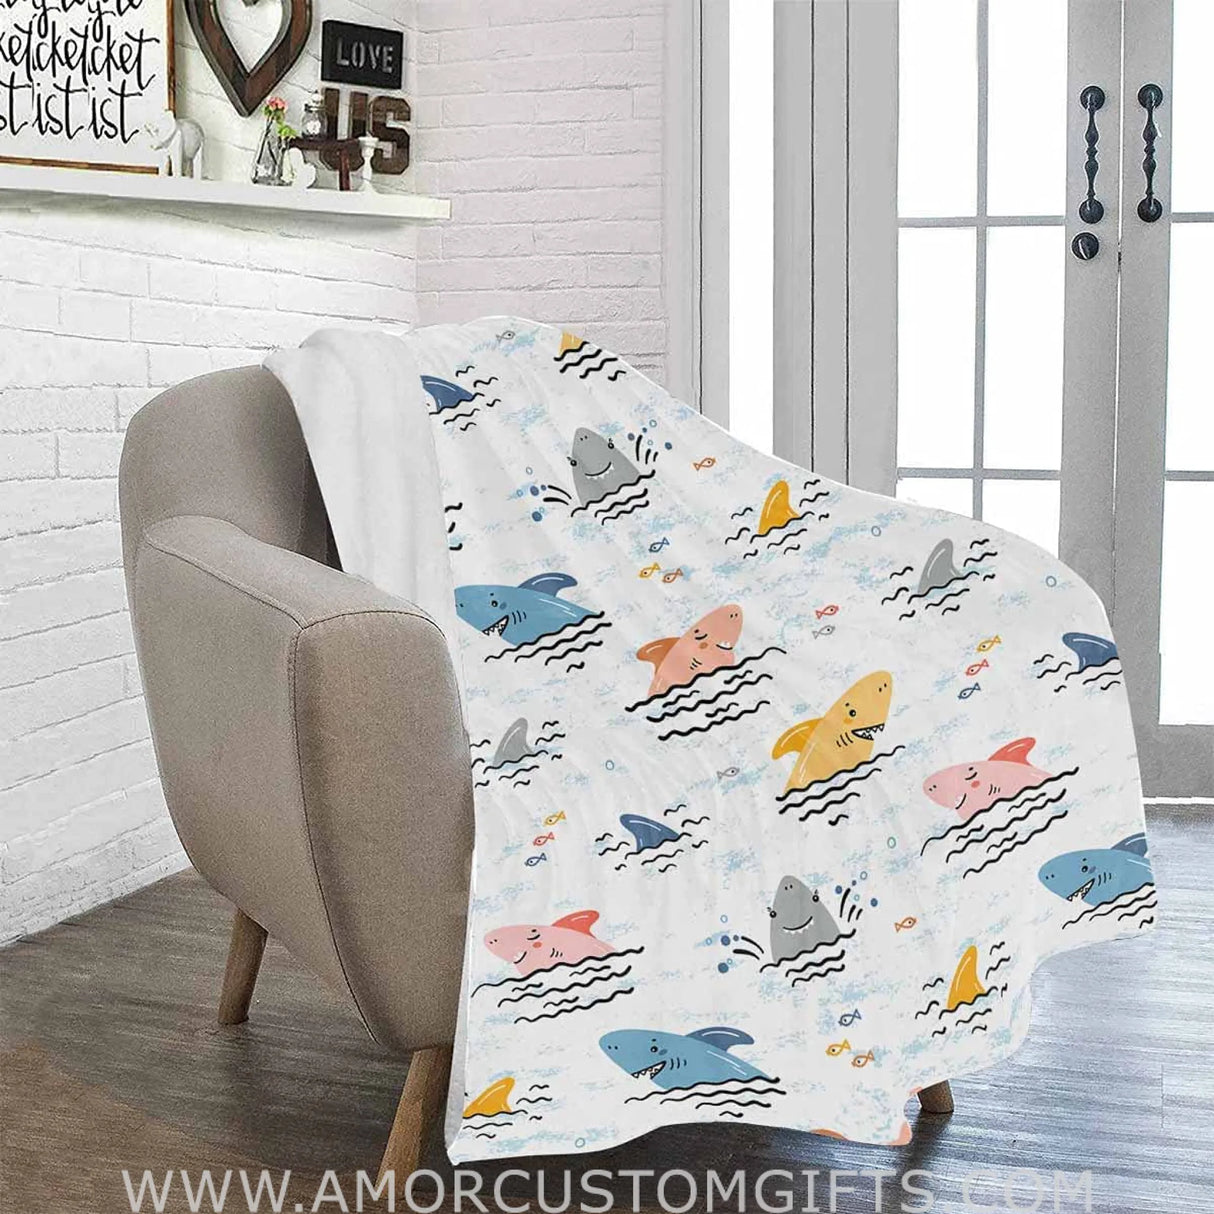 Blankets Custom Name Blankets for Baby Boys Girls - Baby Blankets with Shark Design for Kids - Funny Throw Blanket with Cute Animal